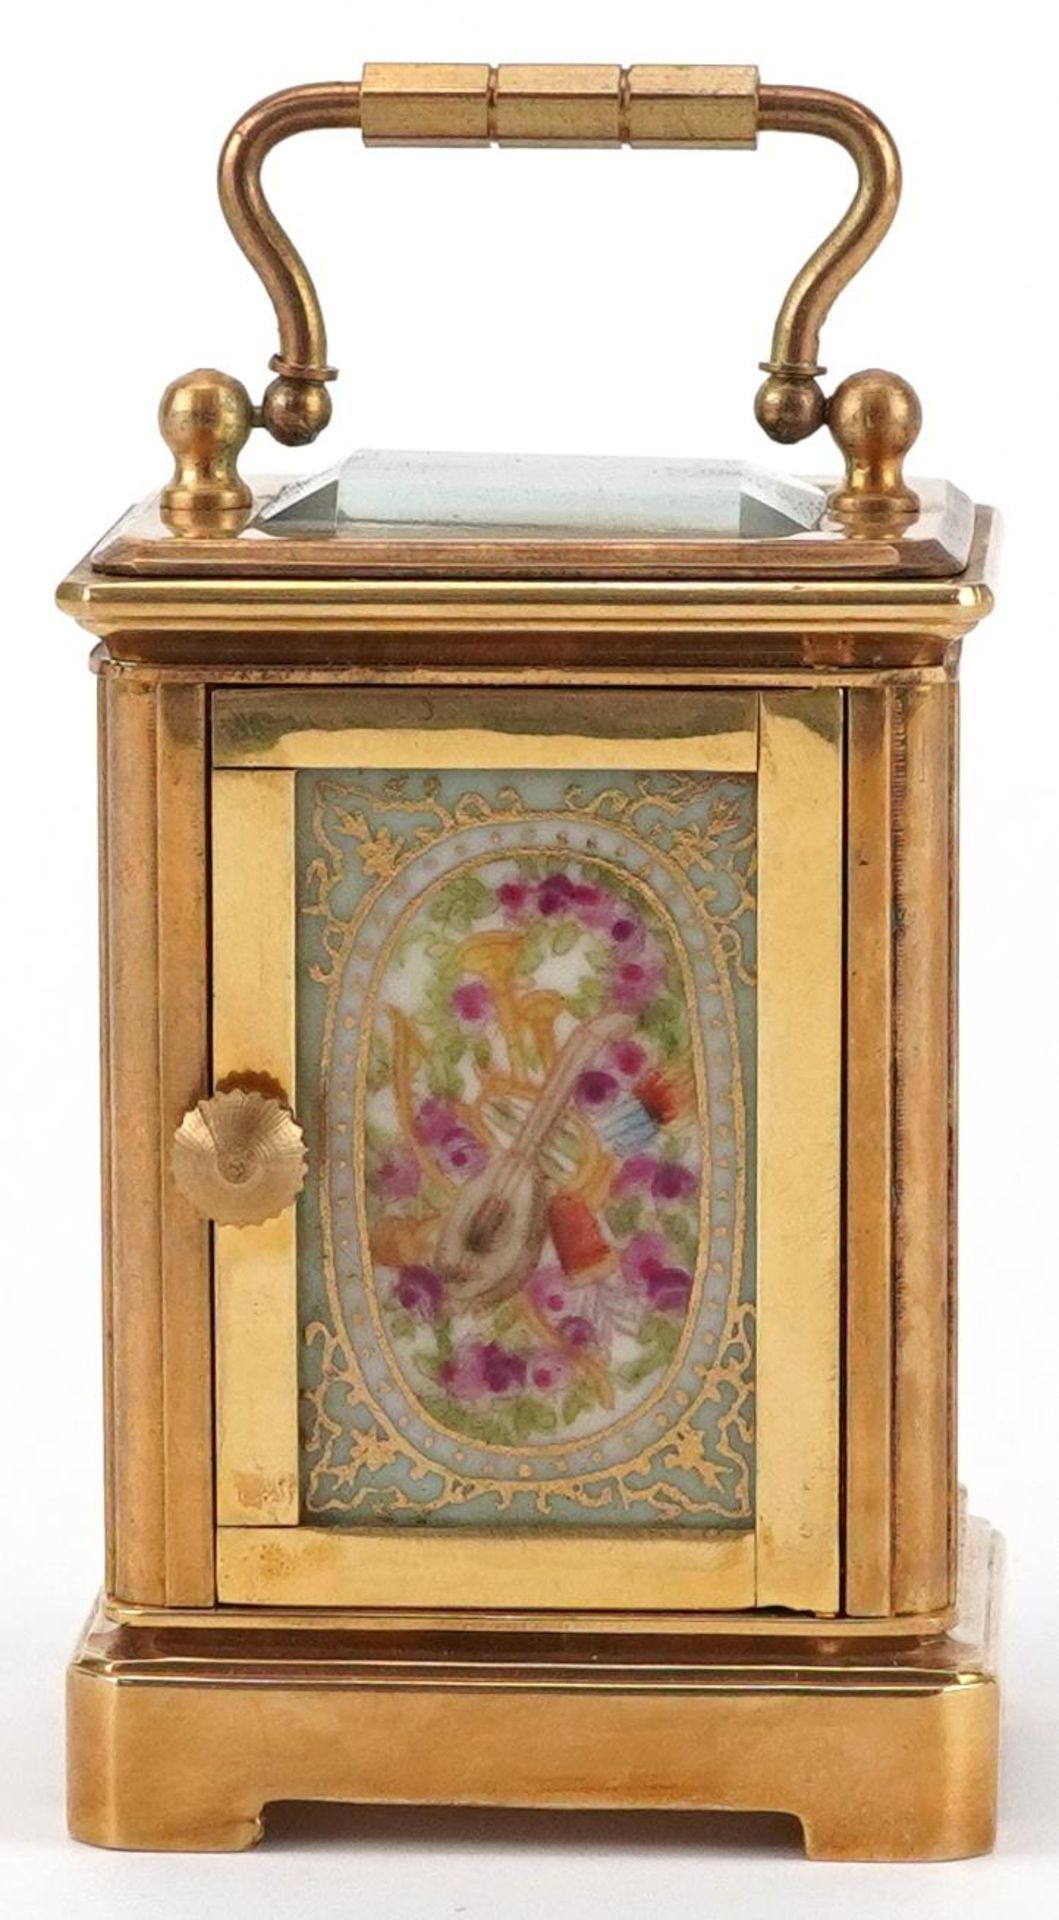 Miniature brass cased carriage clock with Sevres type porcelain panels depicting flowers, 5.5cm high - Image 5 of 8